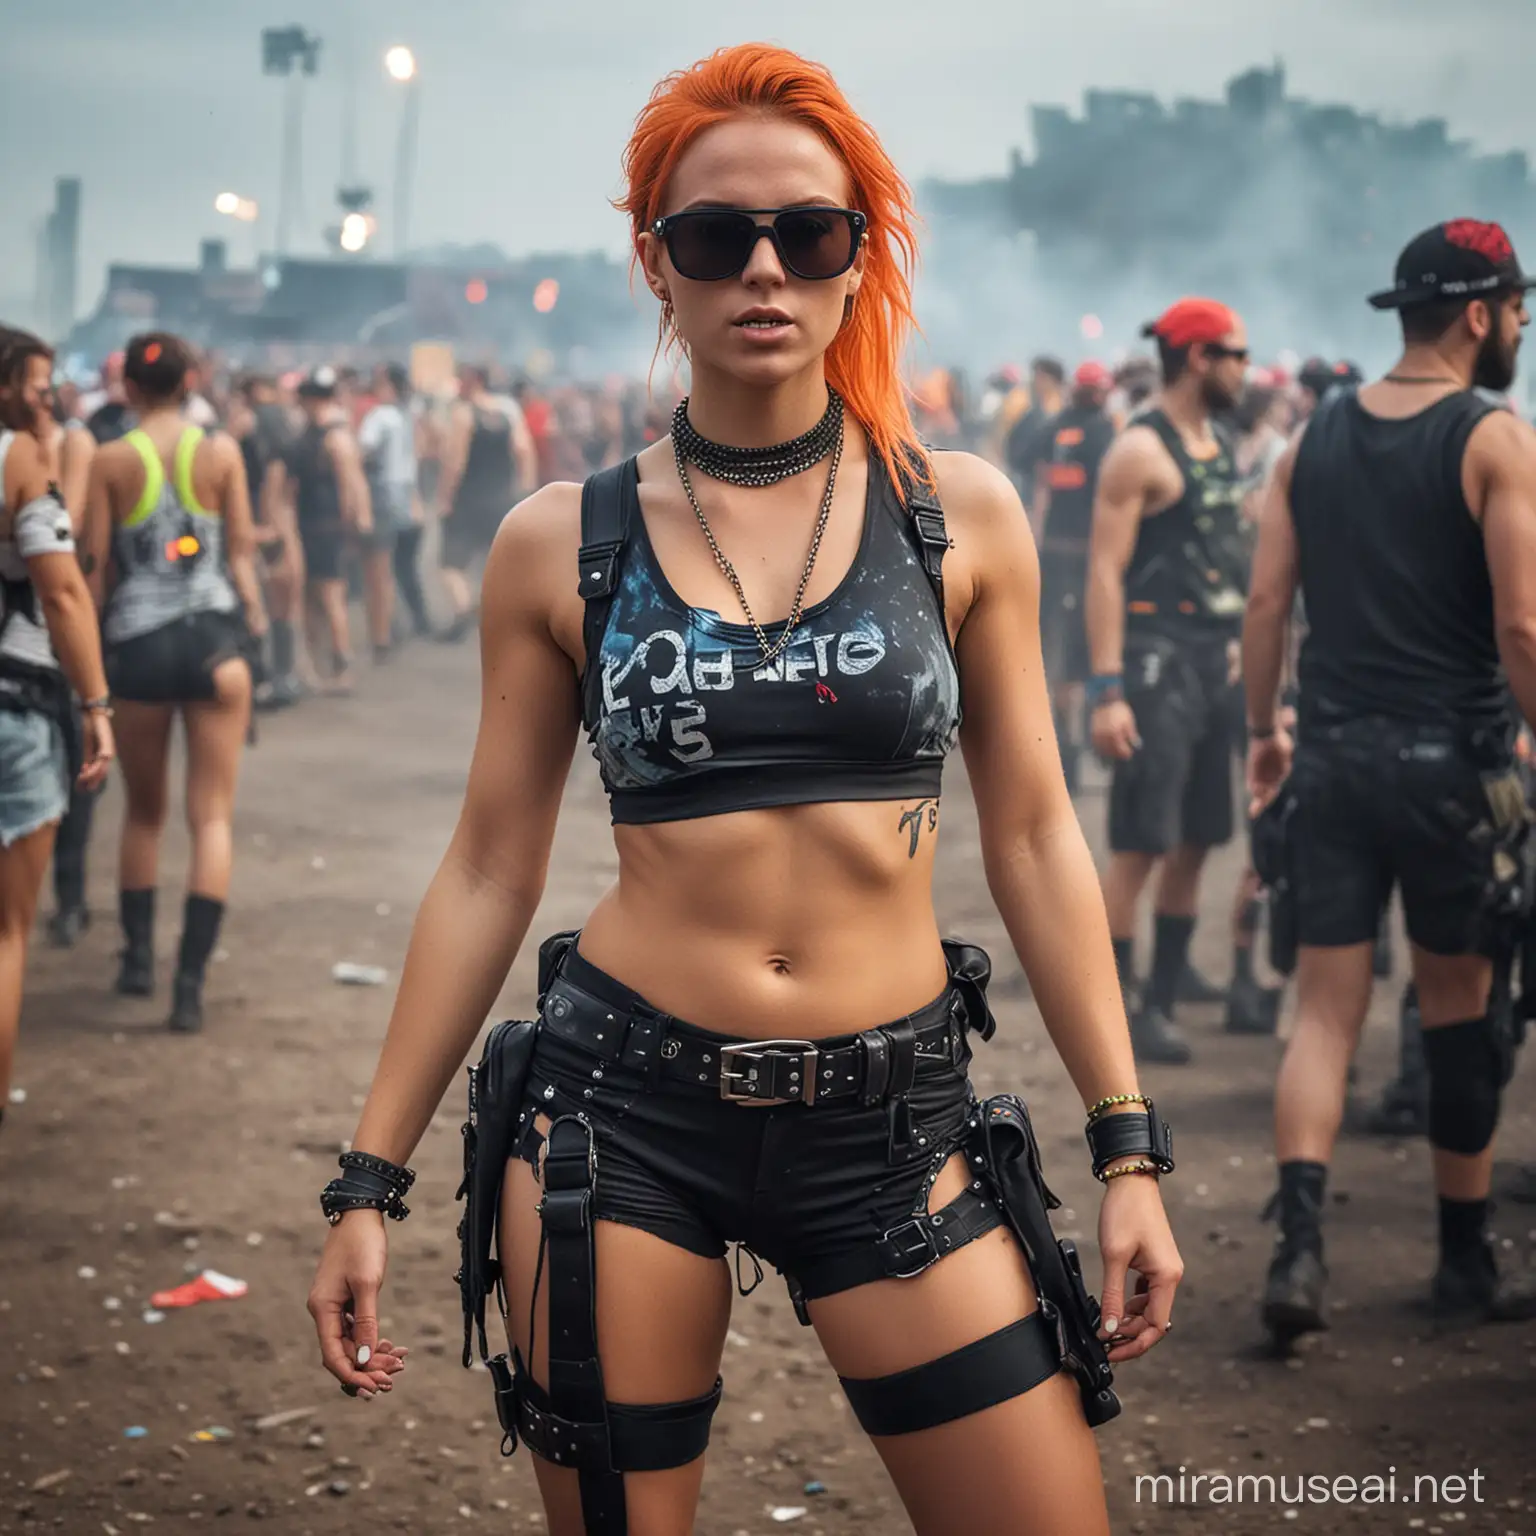 female renegade in rave
, just a picture no words

